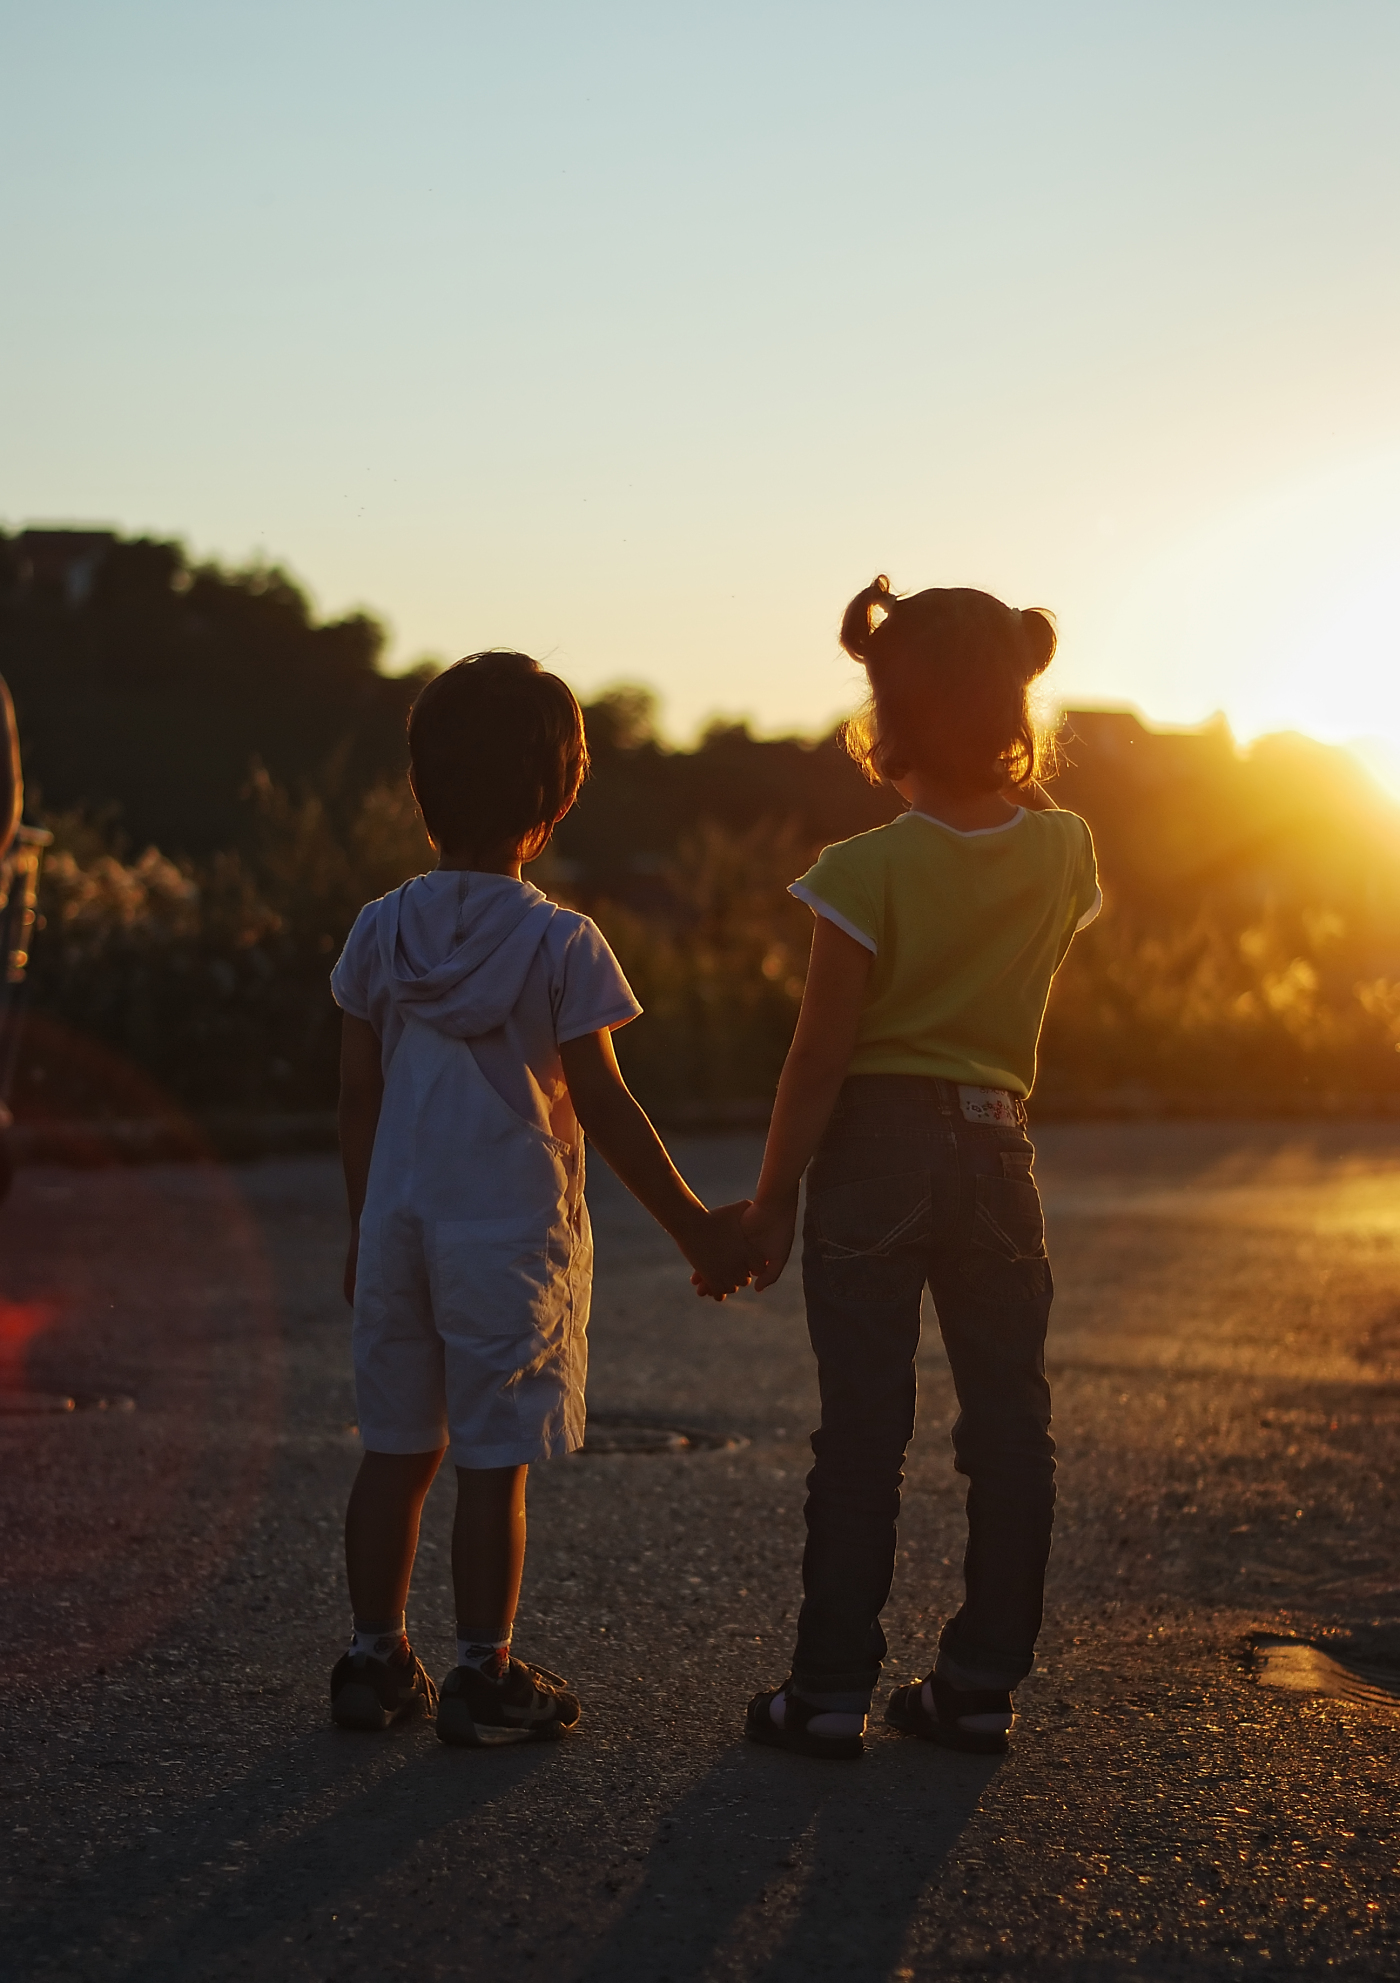 Romantic vision of two children standing together outdoor